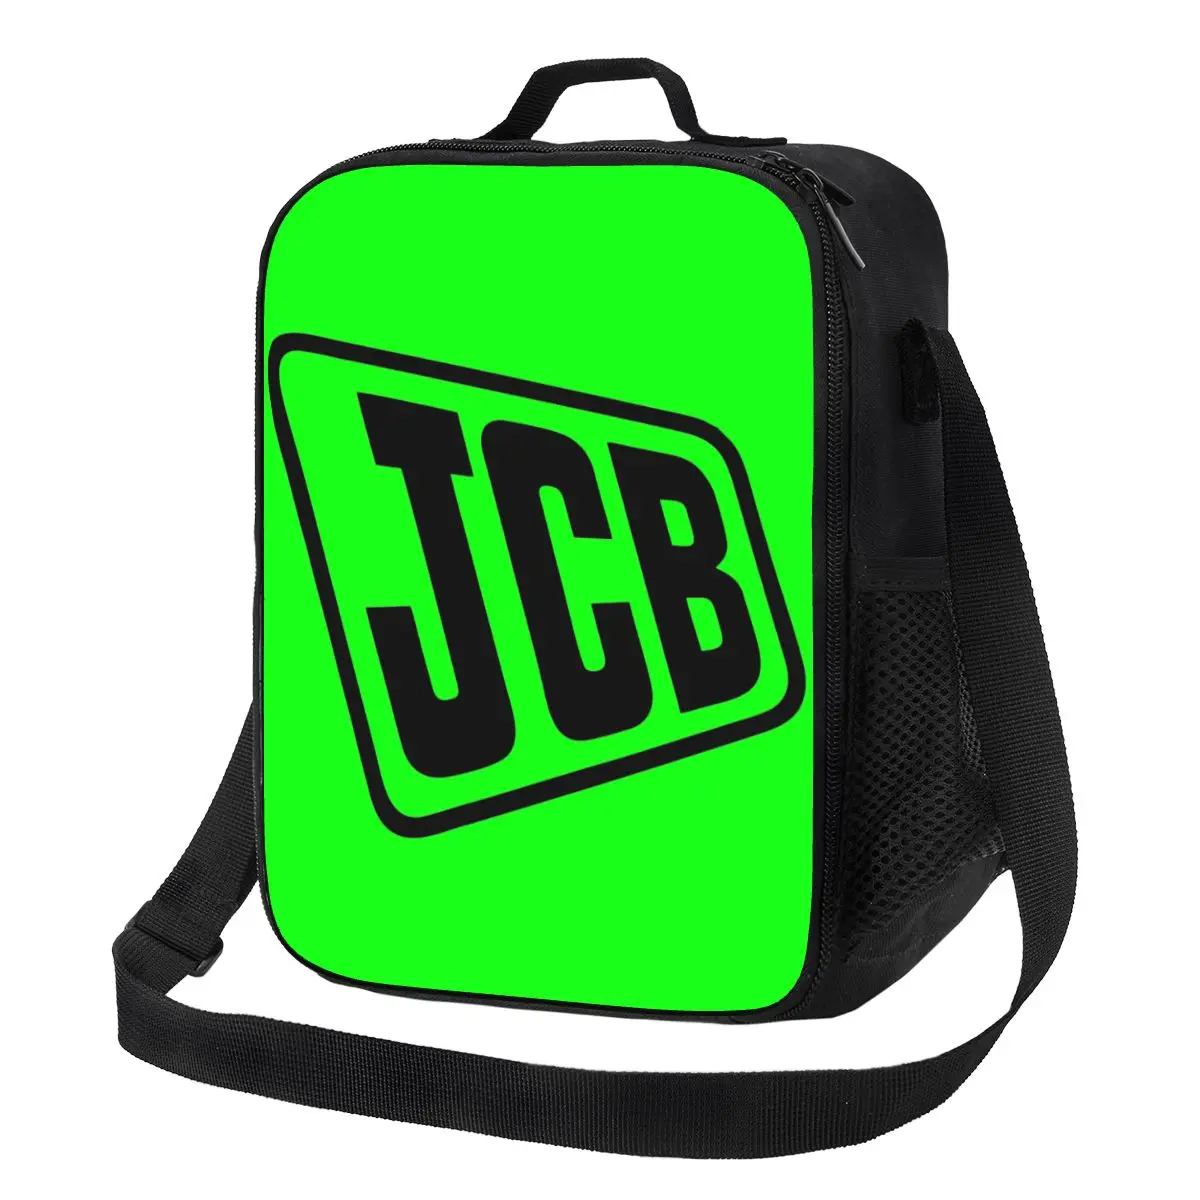 

JCB Insulated Lunch Bag for Women Cooler Thermal Lunch Tote Beach Camping Travel